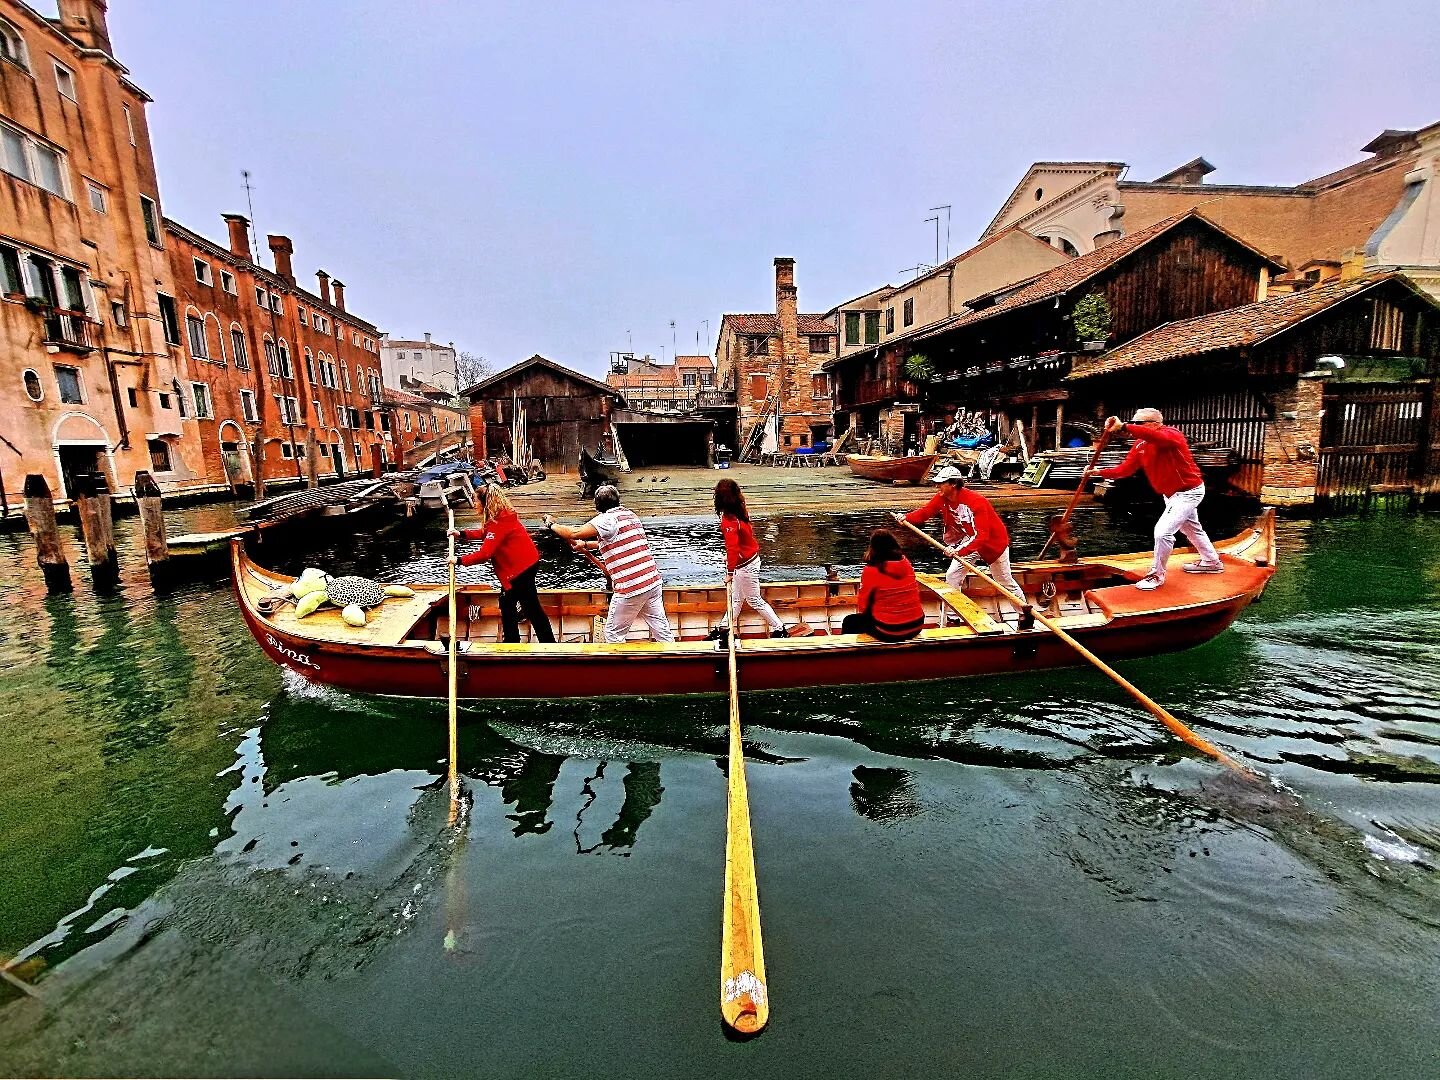 Under the vibrant Venetian sky, the Squero di San Trovaso comes alive, its colors as vivid as the city&rsquo;s rich history. A caorlina glides gracefully by, adding a stroke of life to this picturesque scene of tradition and craftsmanship. This momen